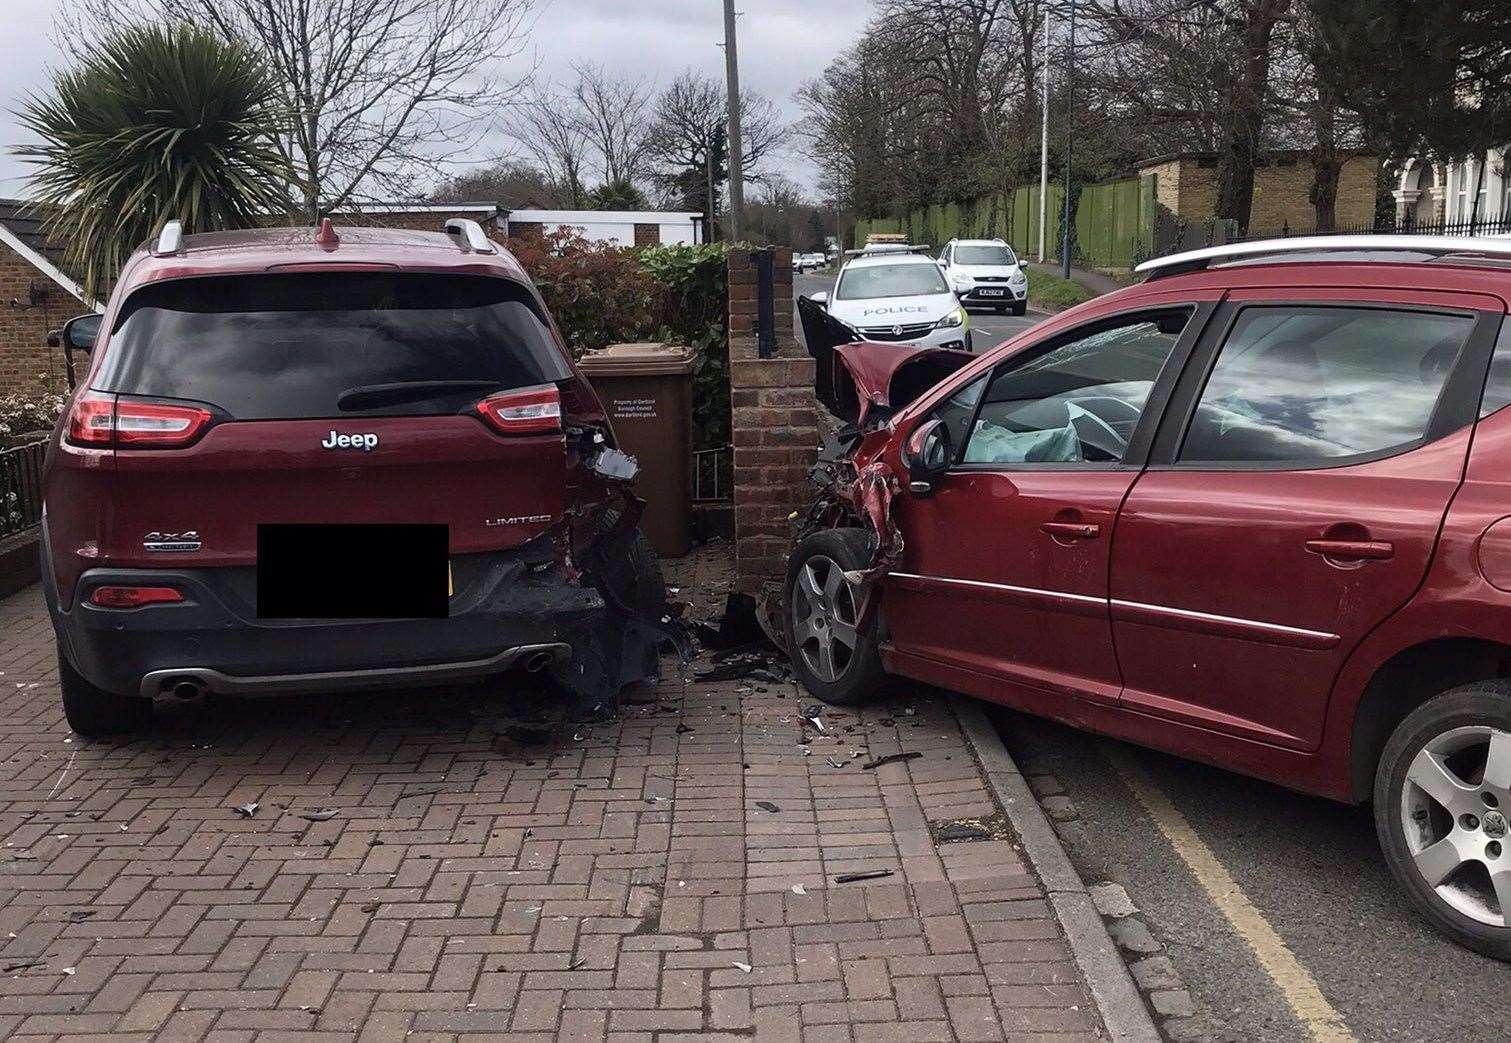 Police were called to the crash in Oakfield Lane. Photo: Kent Police Dartford